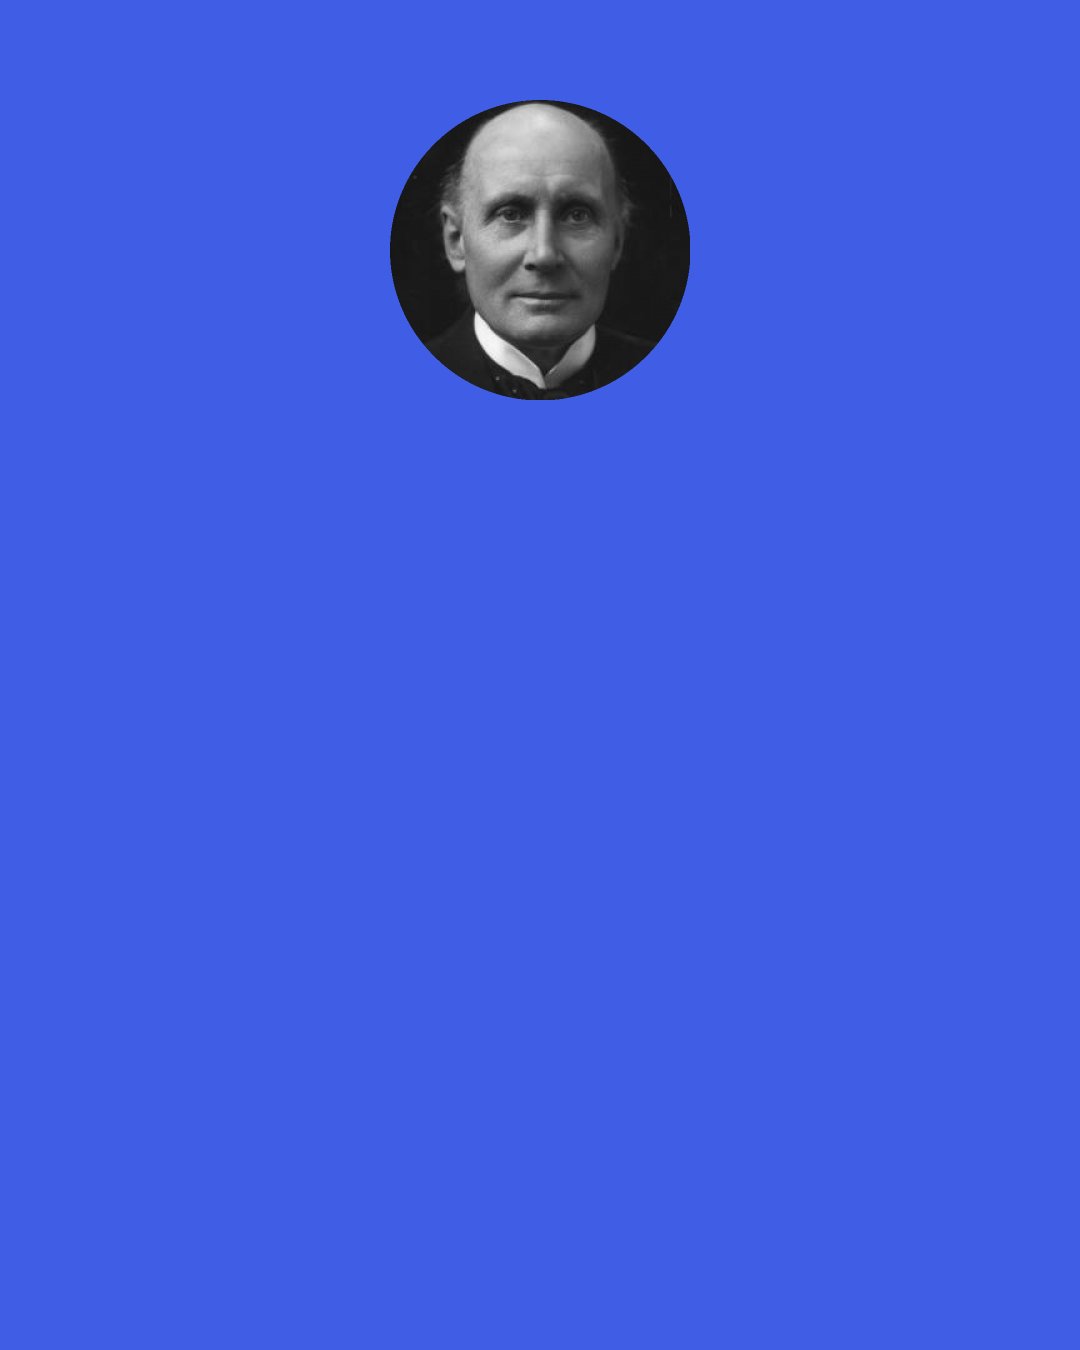 Alfred North Whitehead: "One and one make two" assumes that the changes in the shift of circumstance are unimportant. But it is impossible for us to analyze this notion of unimportant change.